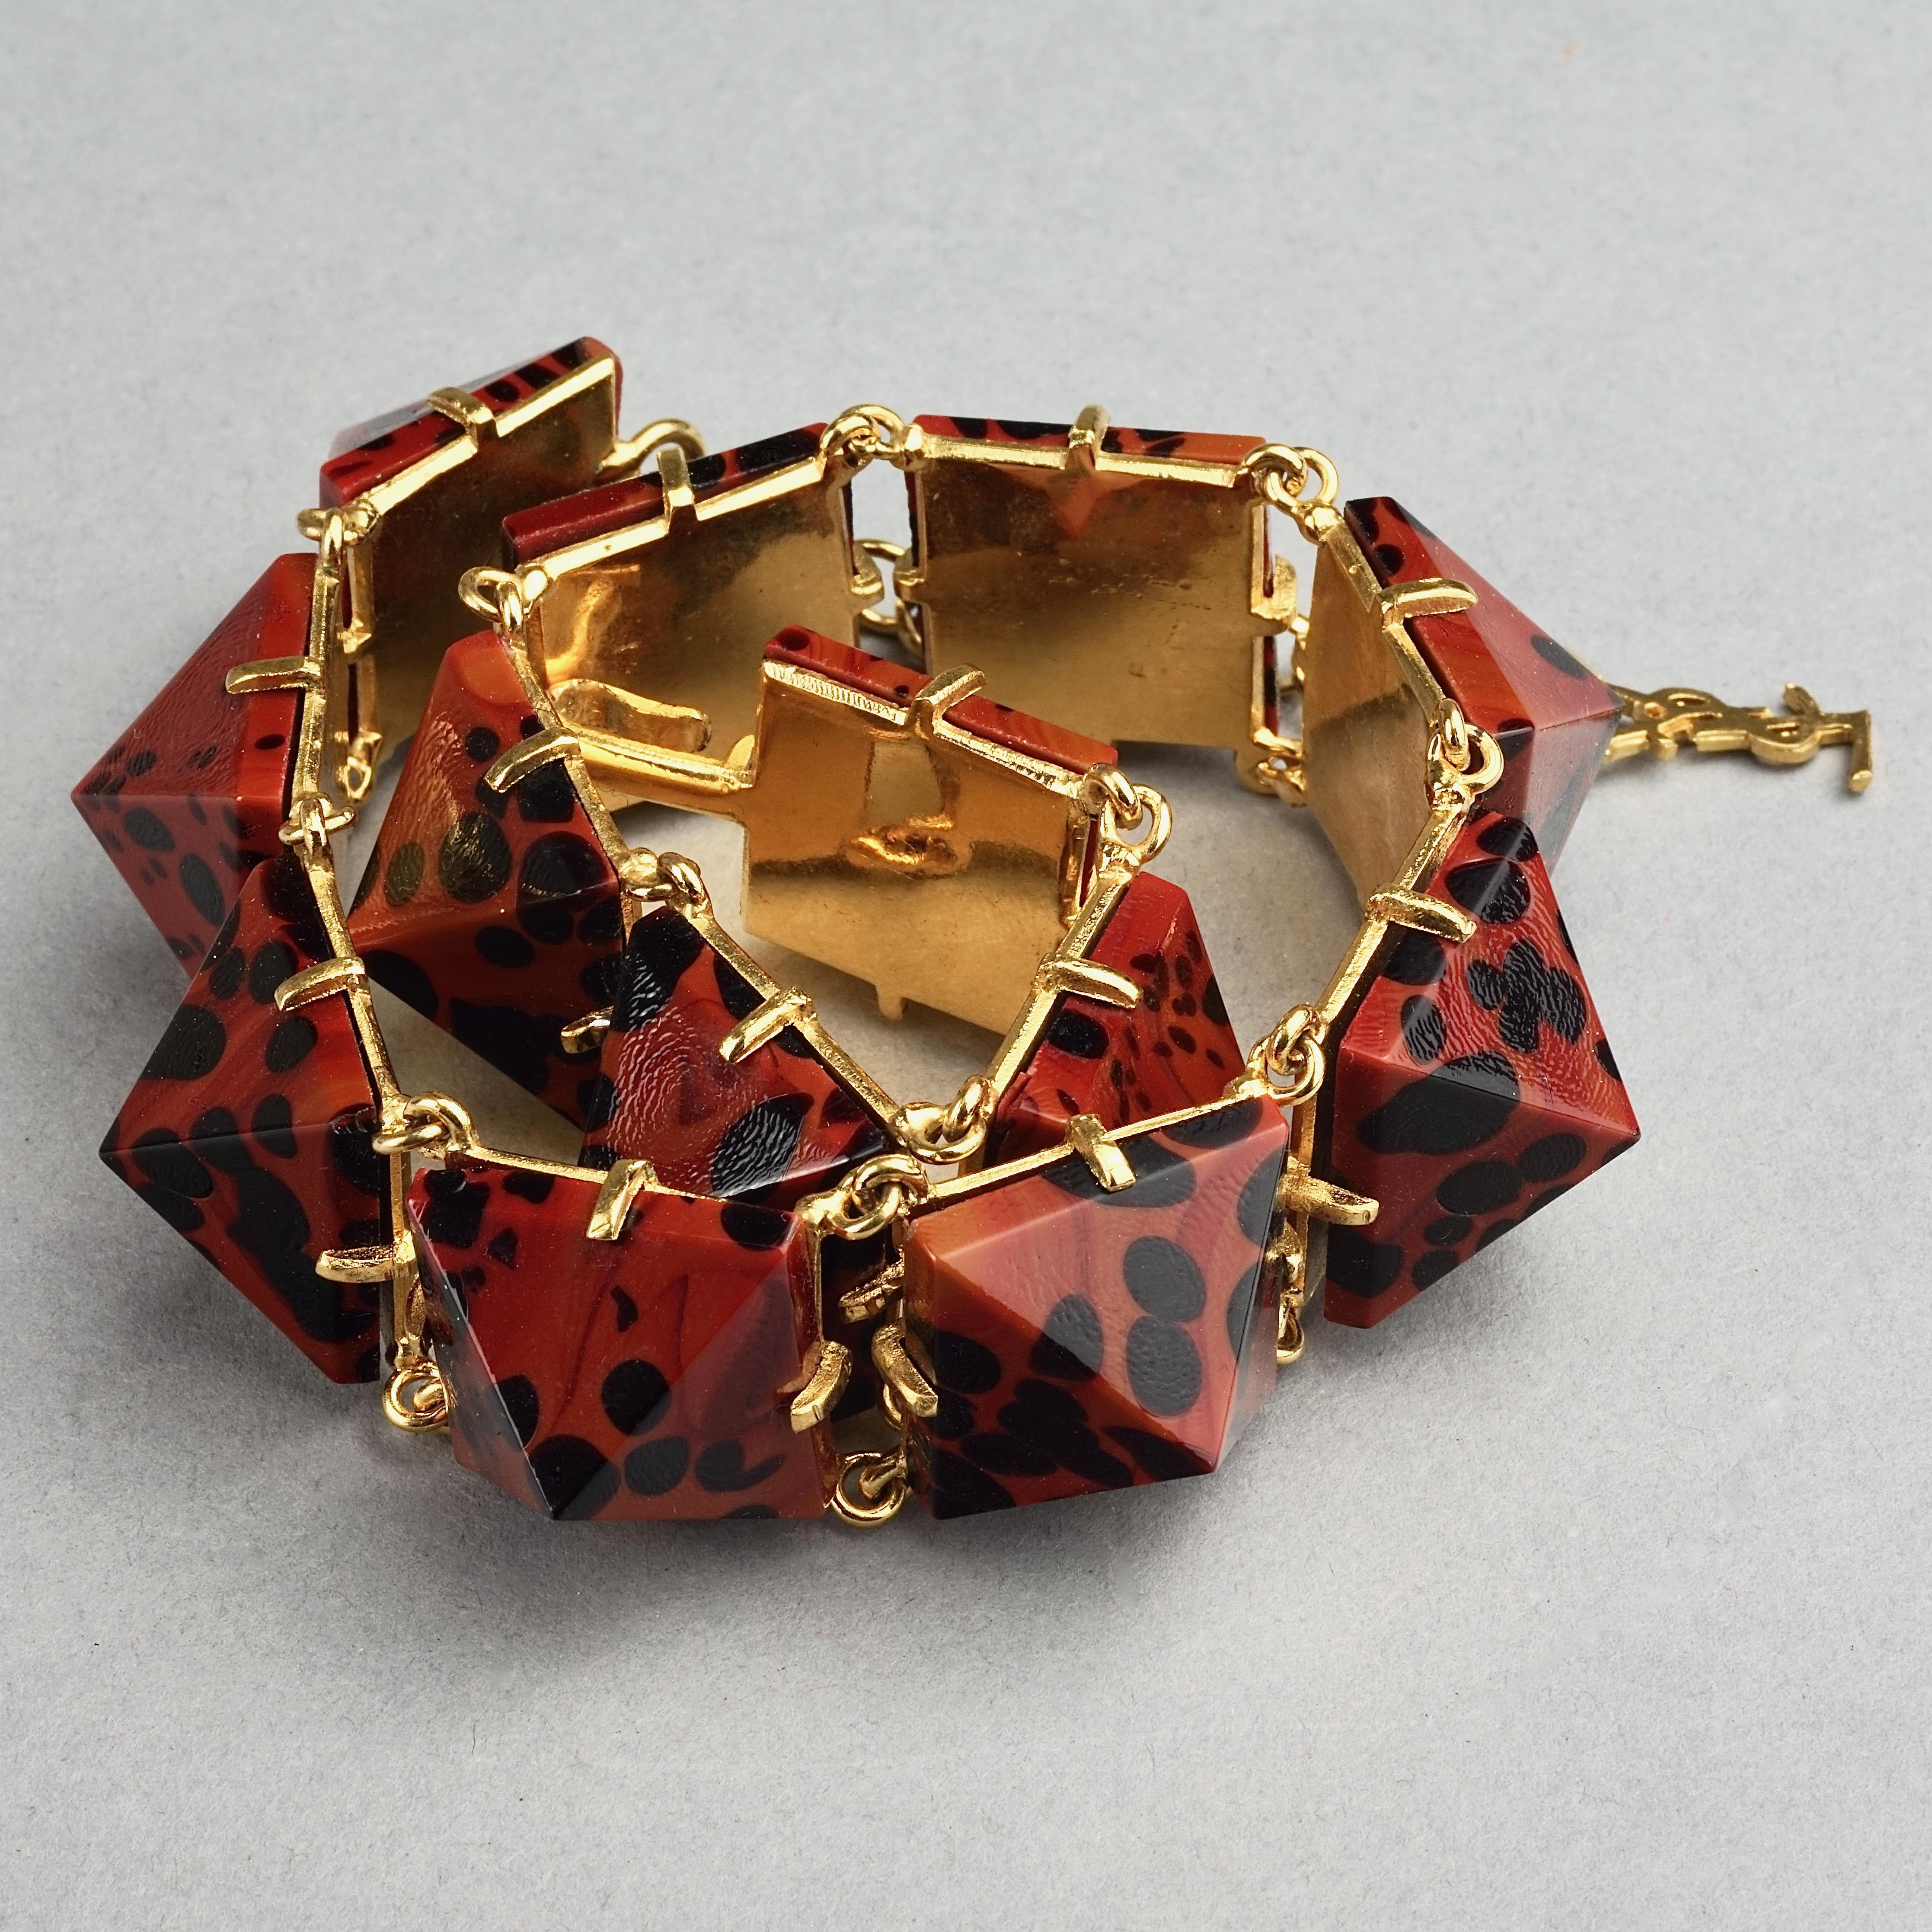 Vintage Iconic YVES SAINT LAURENT Ysl Leopard Pyramid Necklace For Sale 2